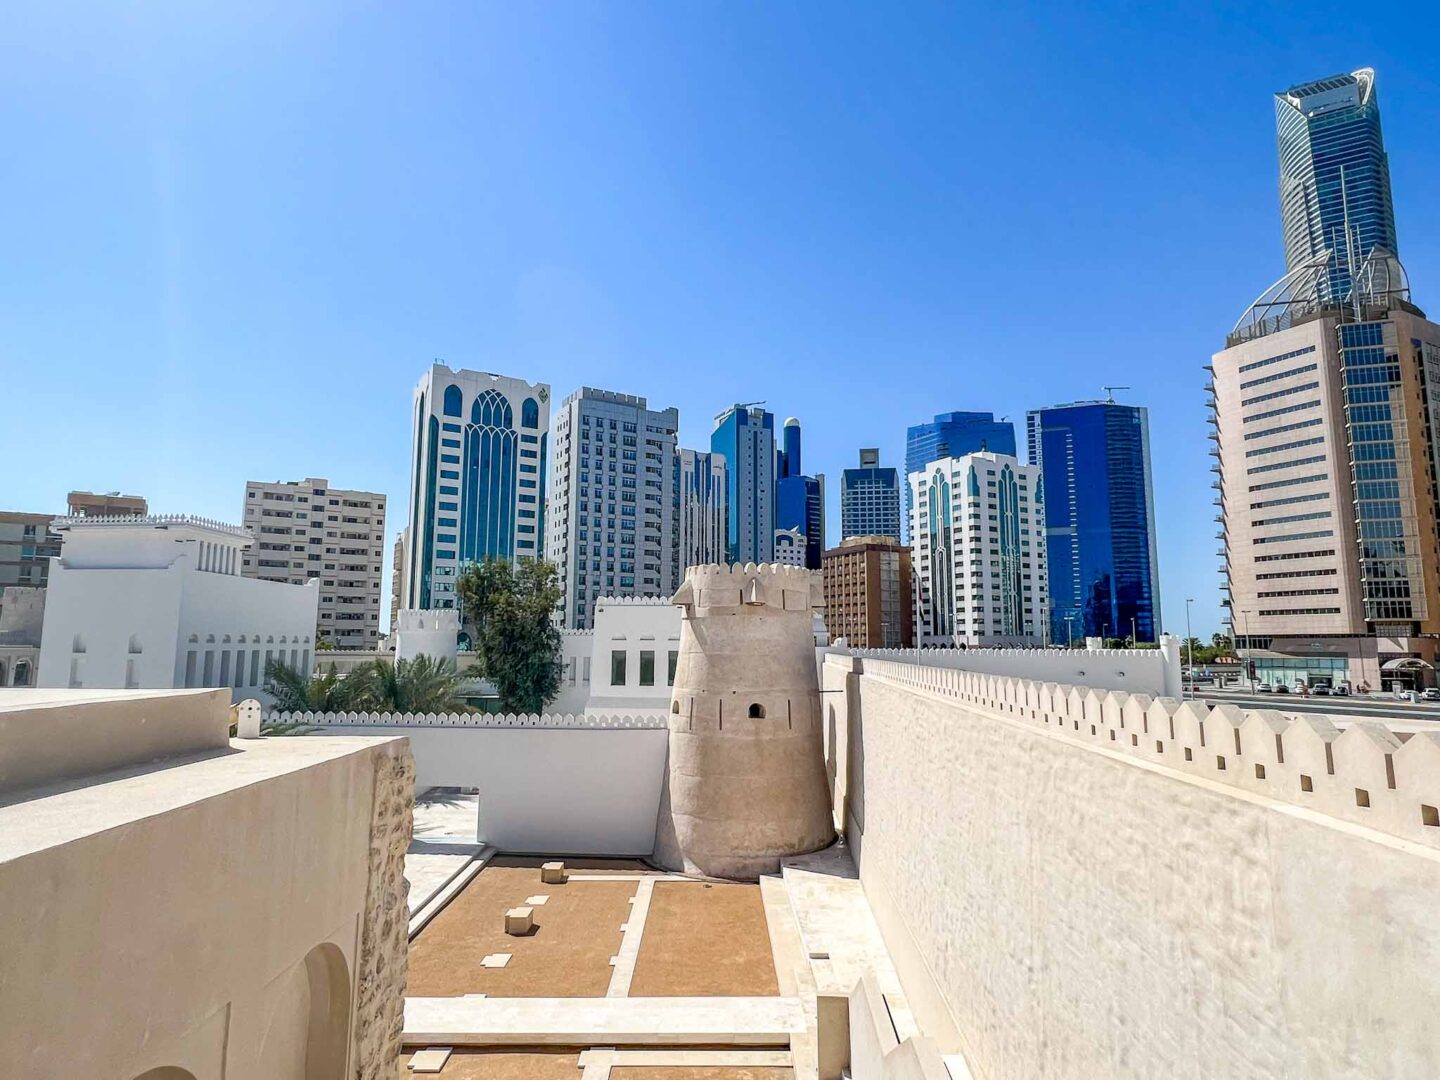 Places to visit in Abu Dhabi,  Qasr AlHosn old and new buildings